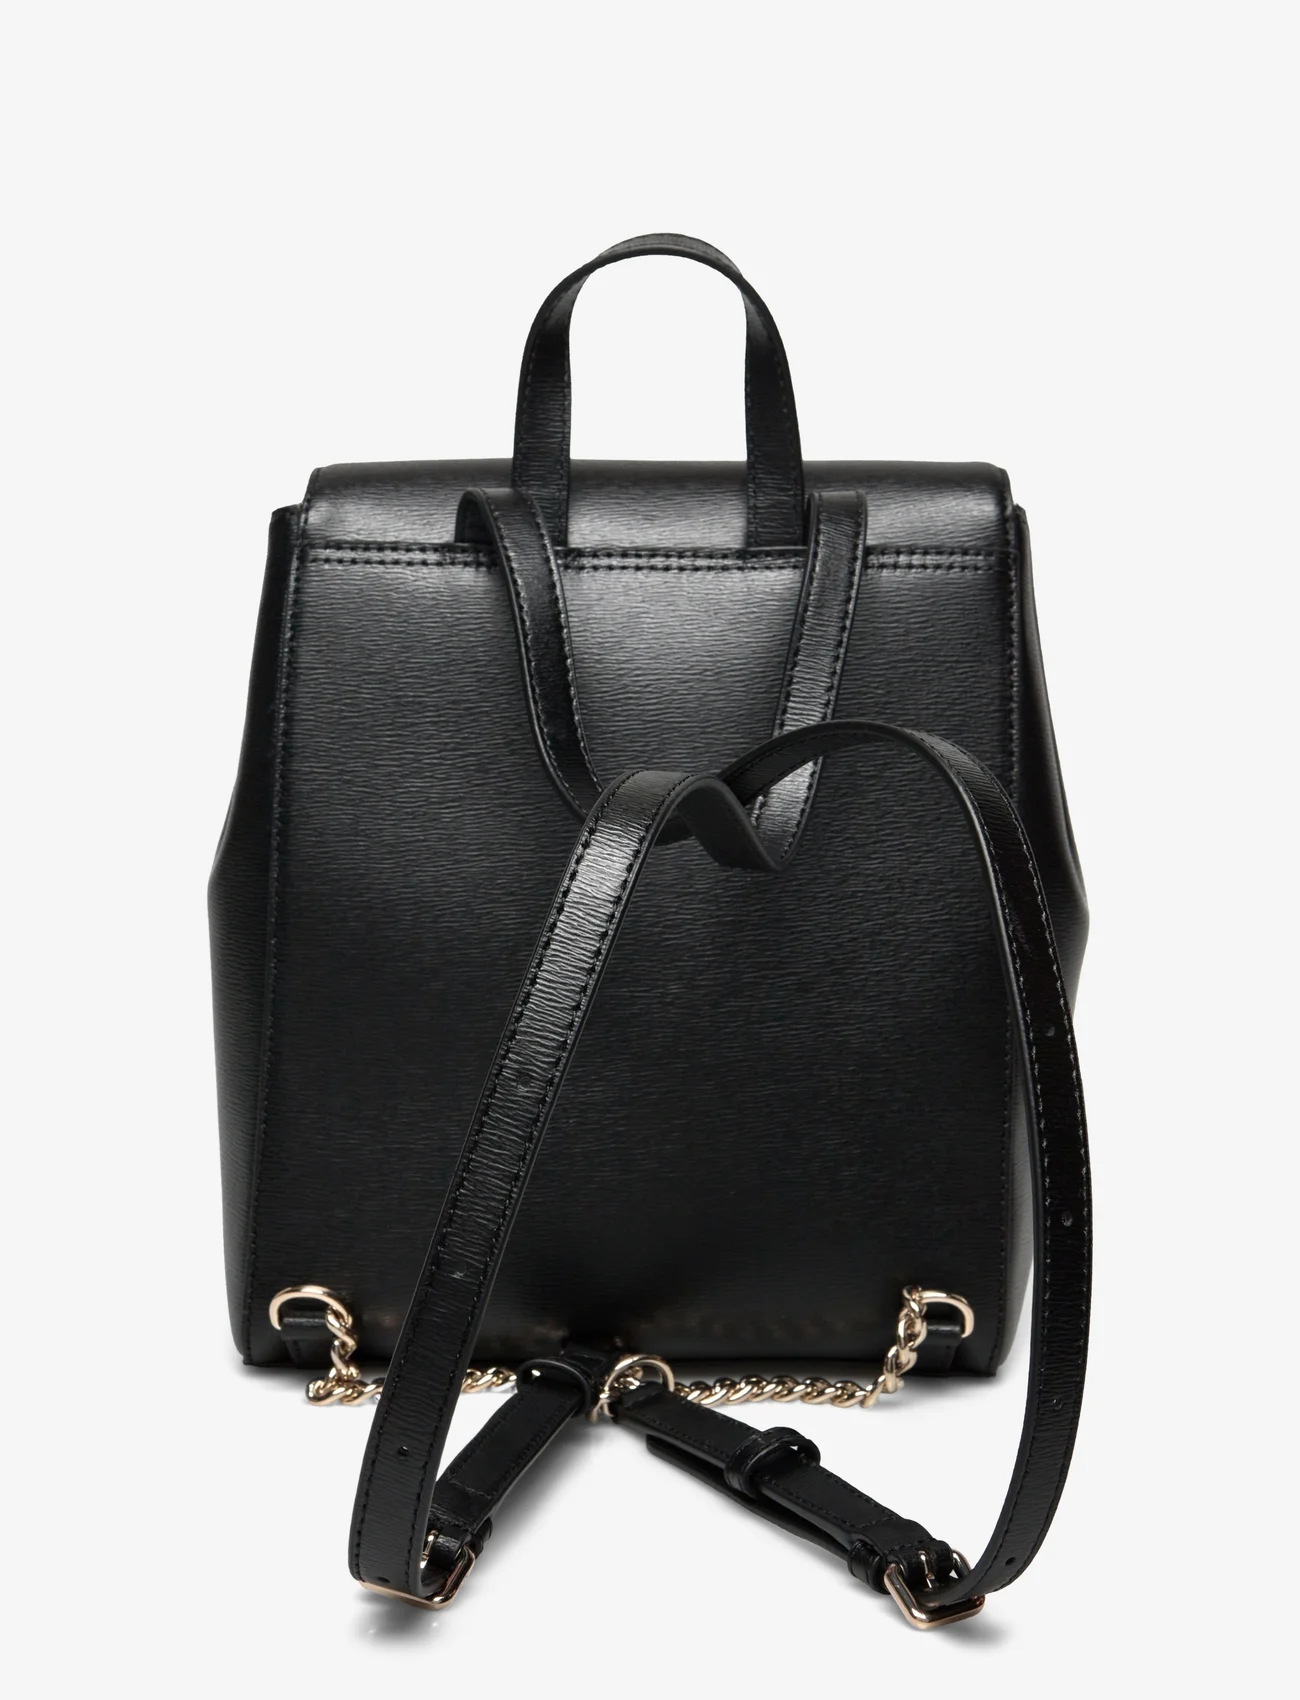 DKNY Bags - BRYANT FLAP BACKPACK - moterims - bgd - blk/gold - 1